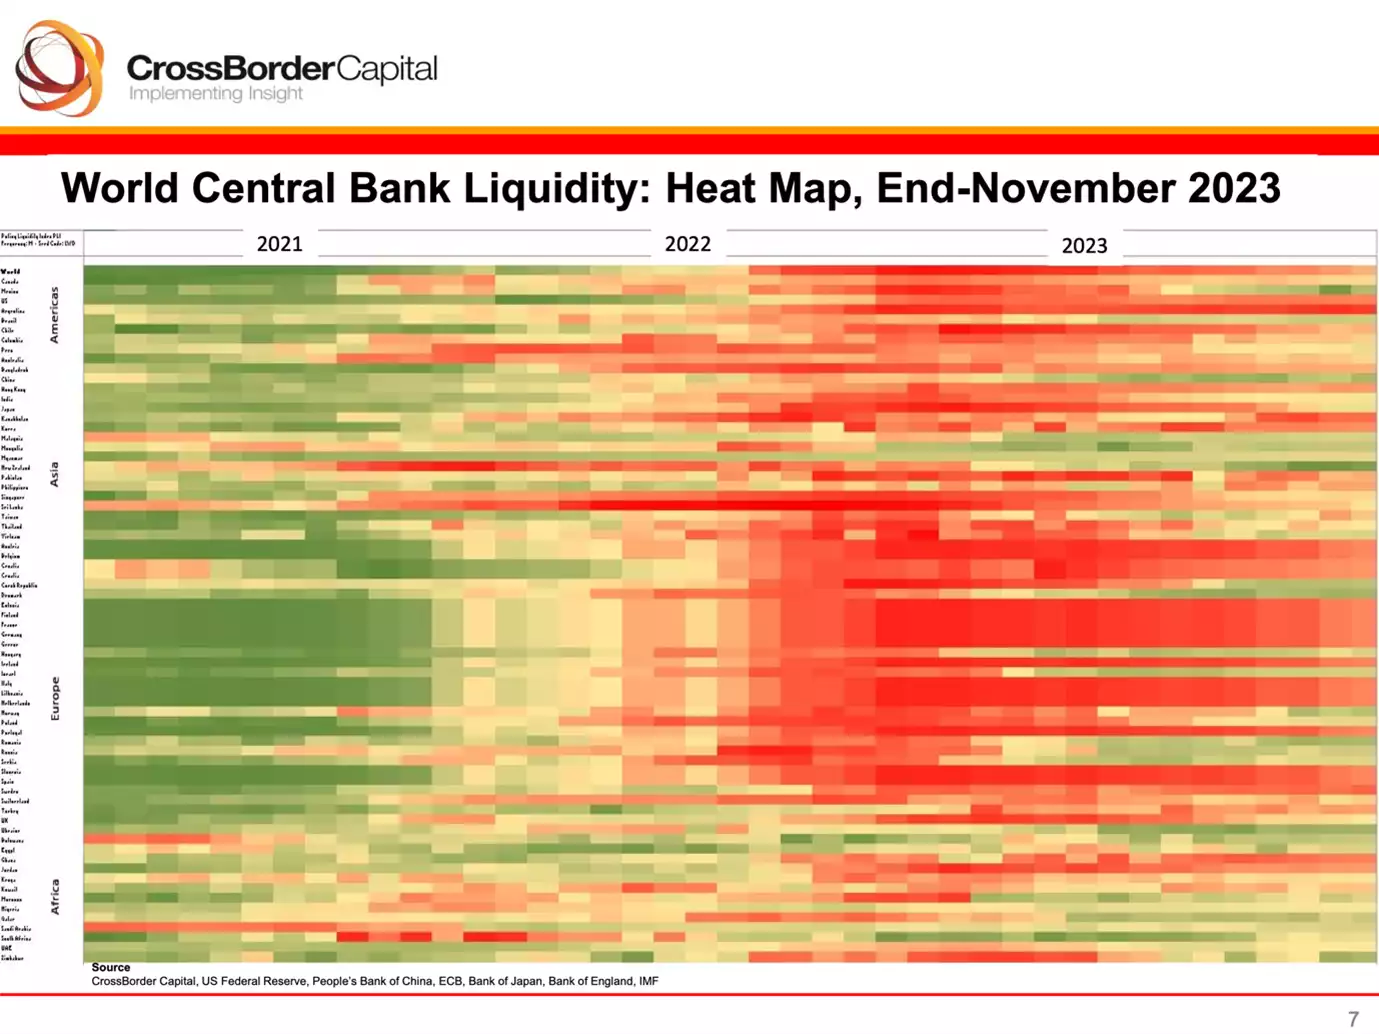 World Central Bank Liquidity: Heat map, End-November 2023